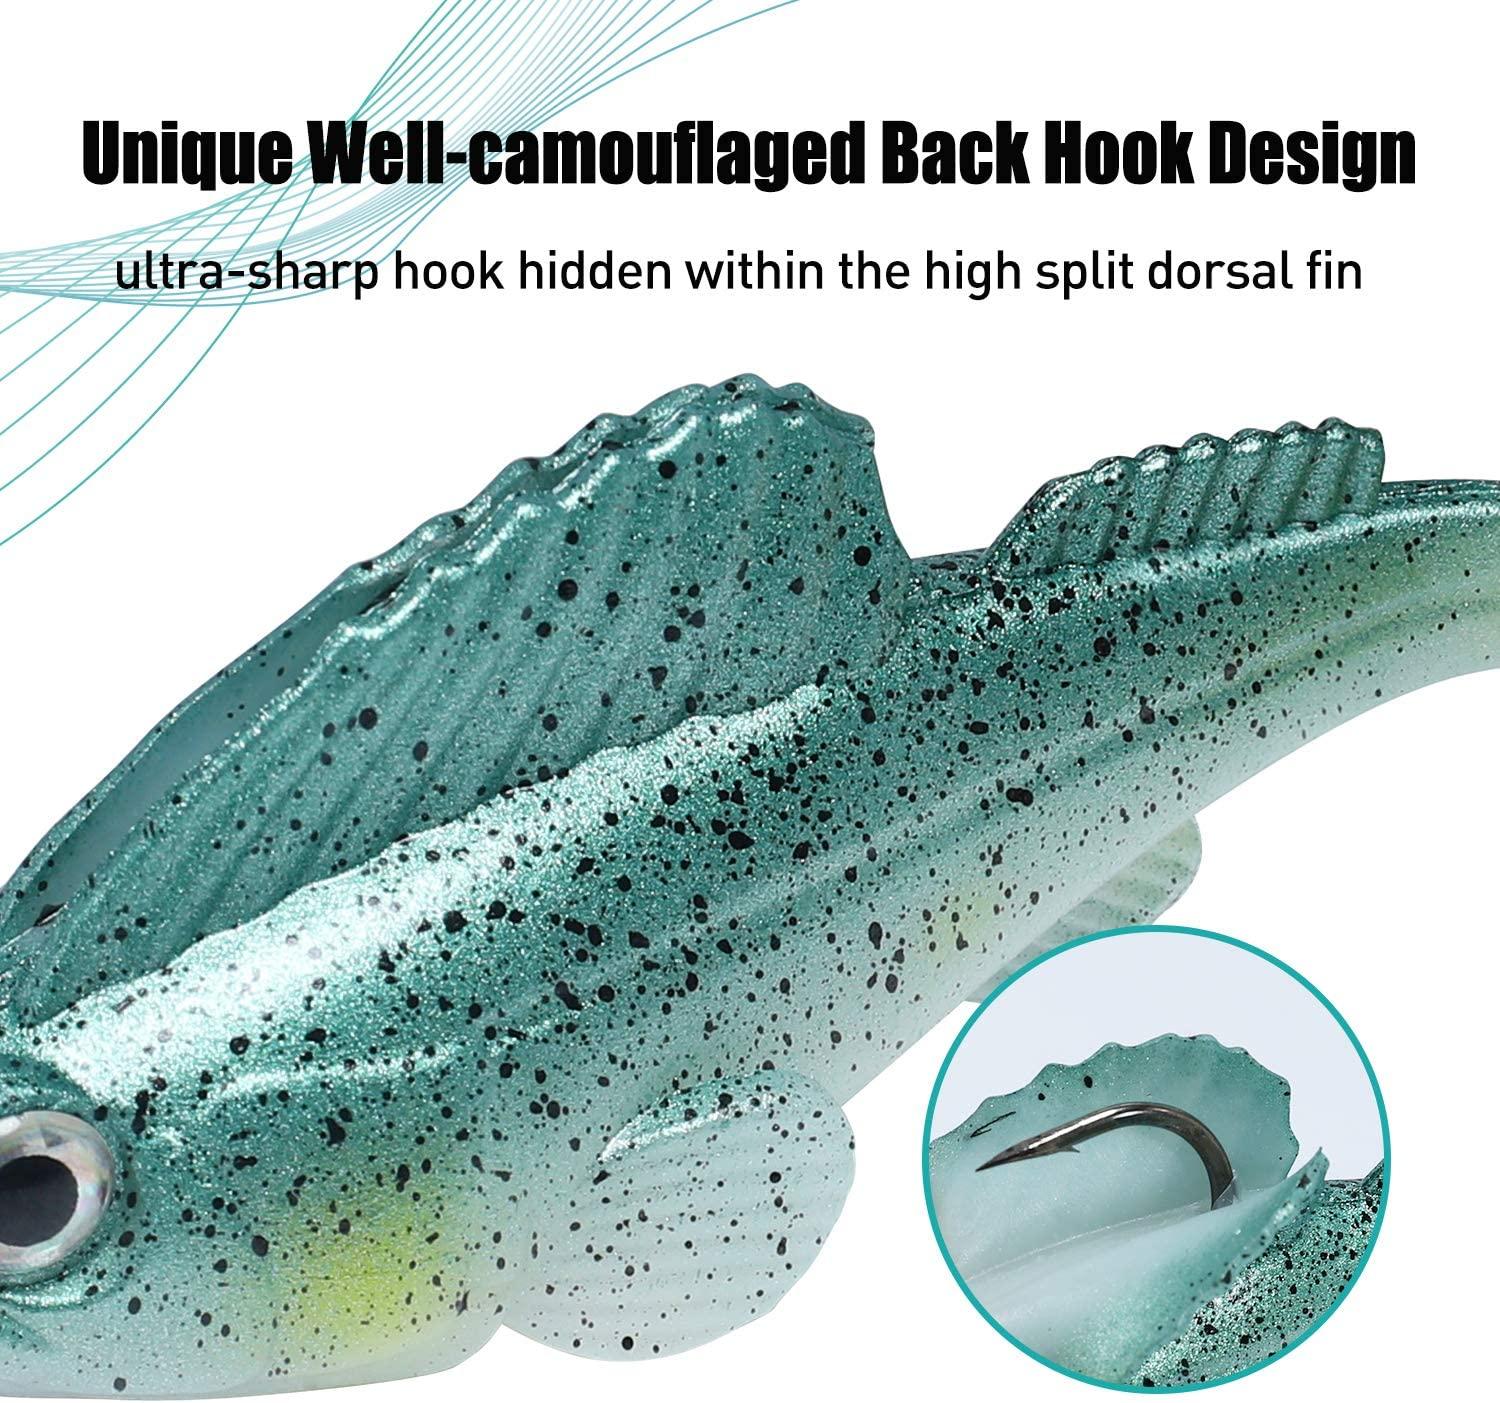 TRUSCEND Weedless Soft Fishing Lures for Bass Pre-Rigged Swimbait with BKK Hook  Paddle Tail Fishing Baits for Freshwater Jighead Lures TPE Swimbaits Bass  Trout Crappie Walleye Pike Fishing Jigs A-2.8-0.4oz